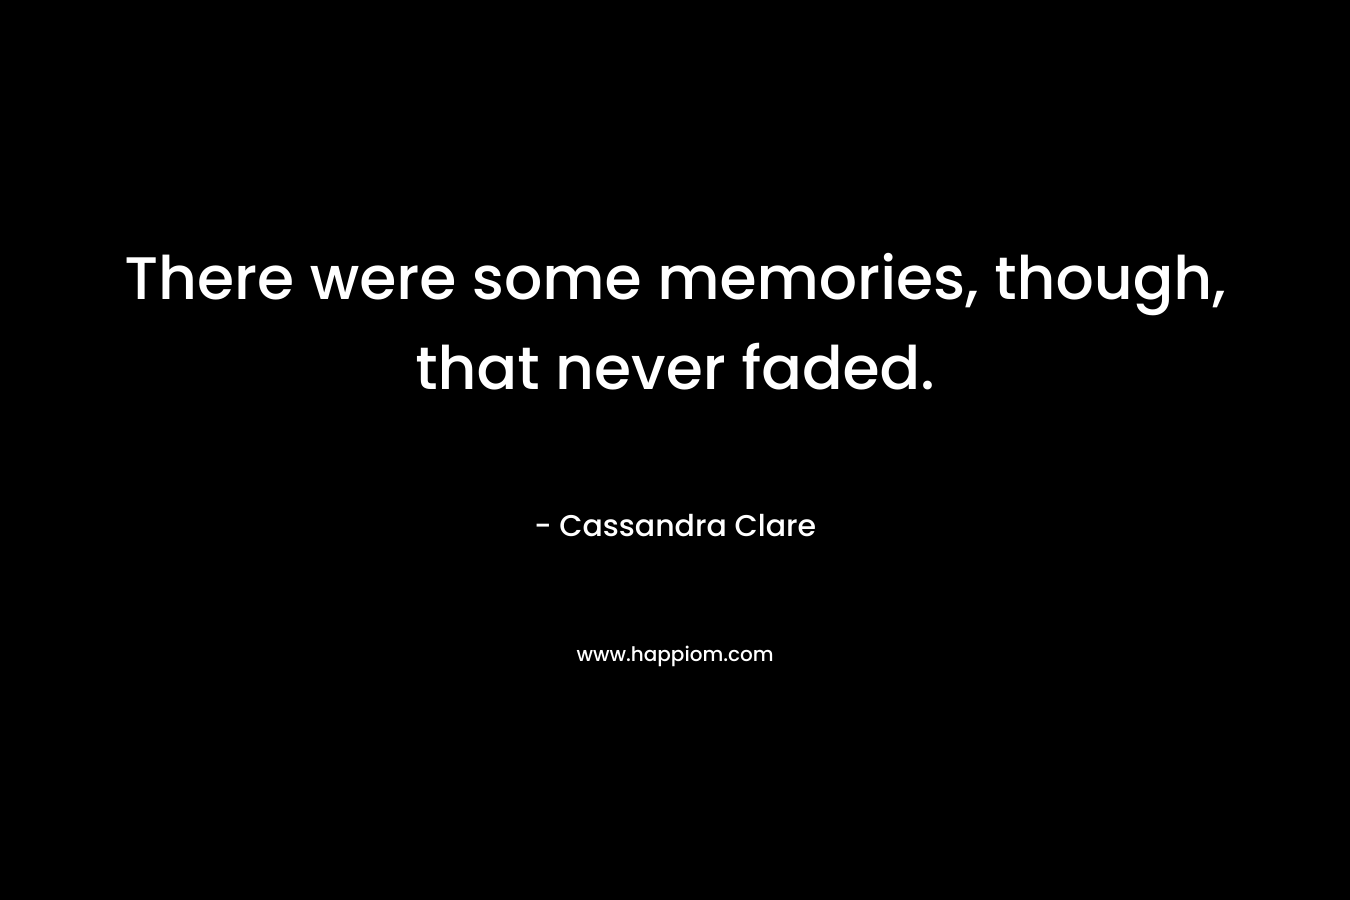 There were some memories, though, that never faded. – Cassandra Clare